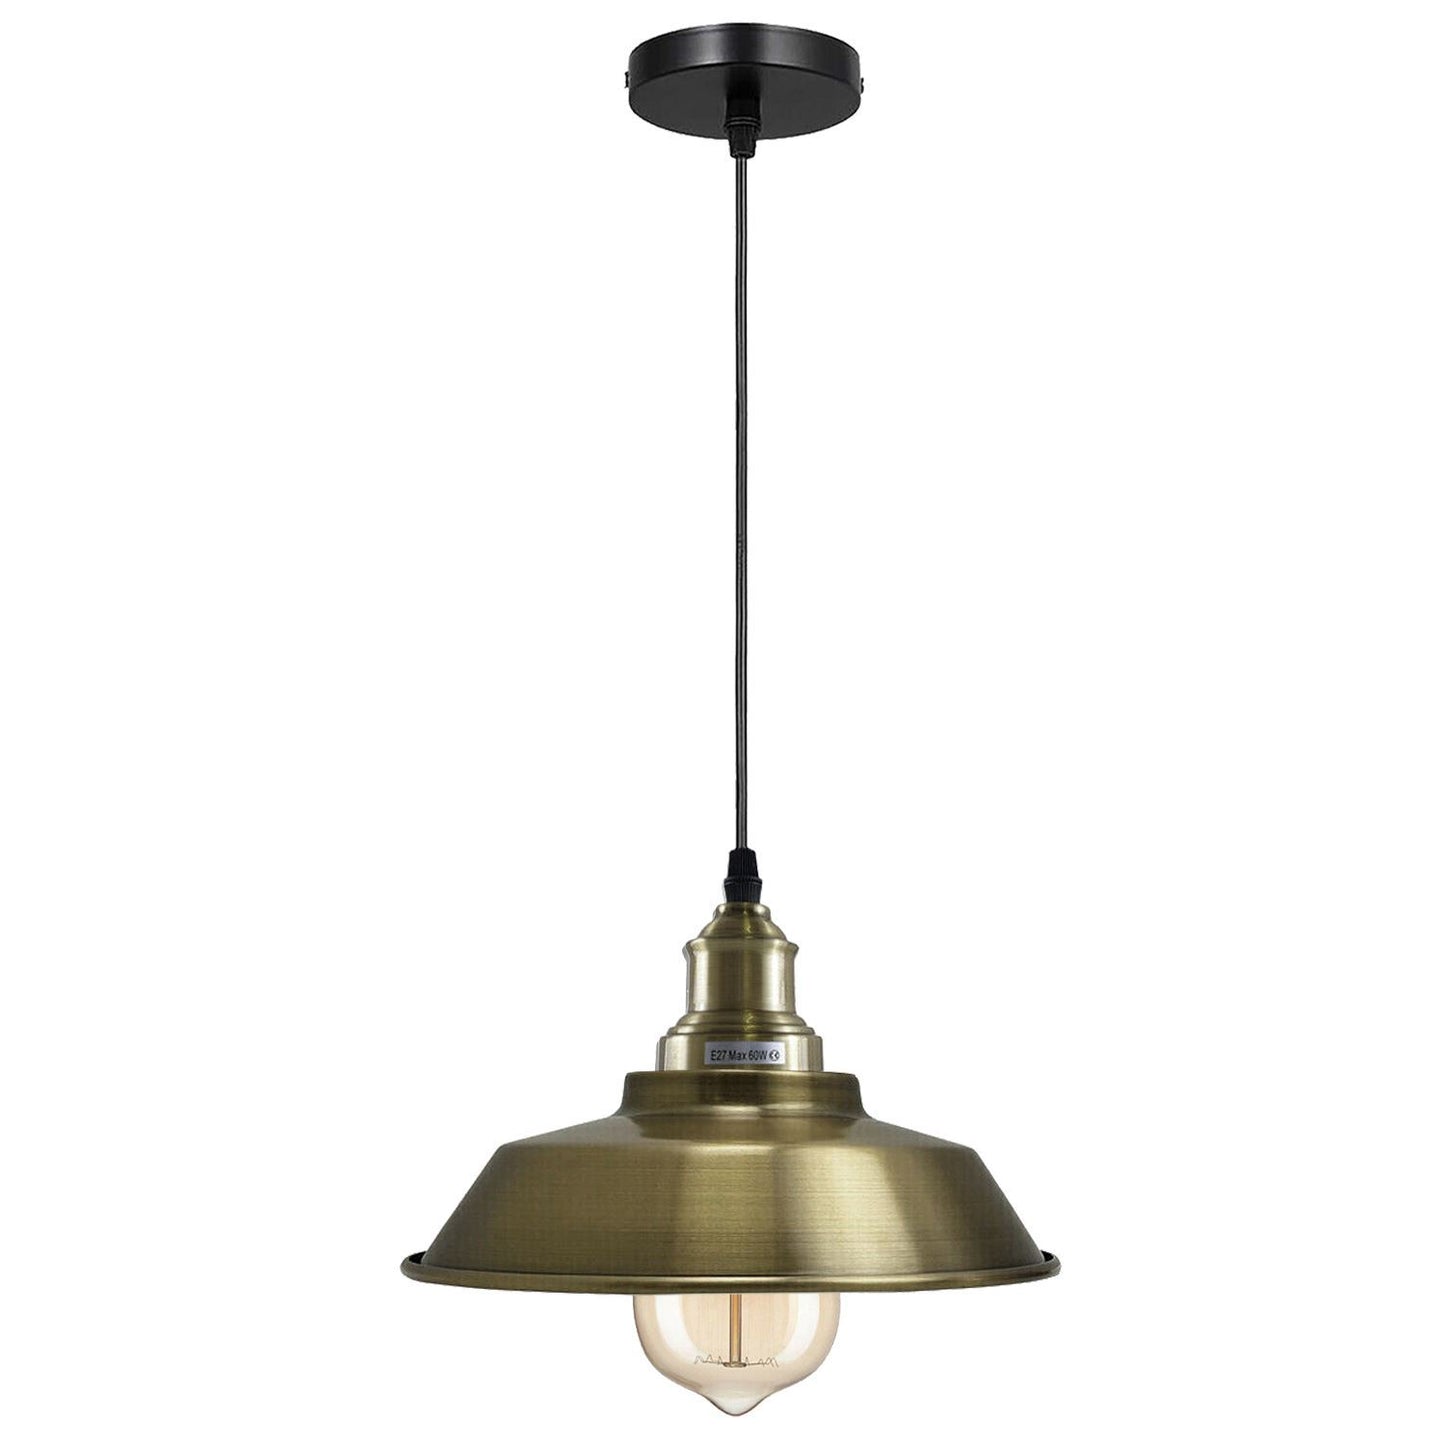  Industrial Metal Ceiling Shade Retro Hanging Style Pendant Light